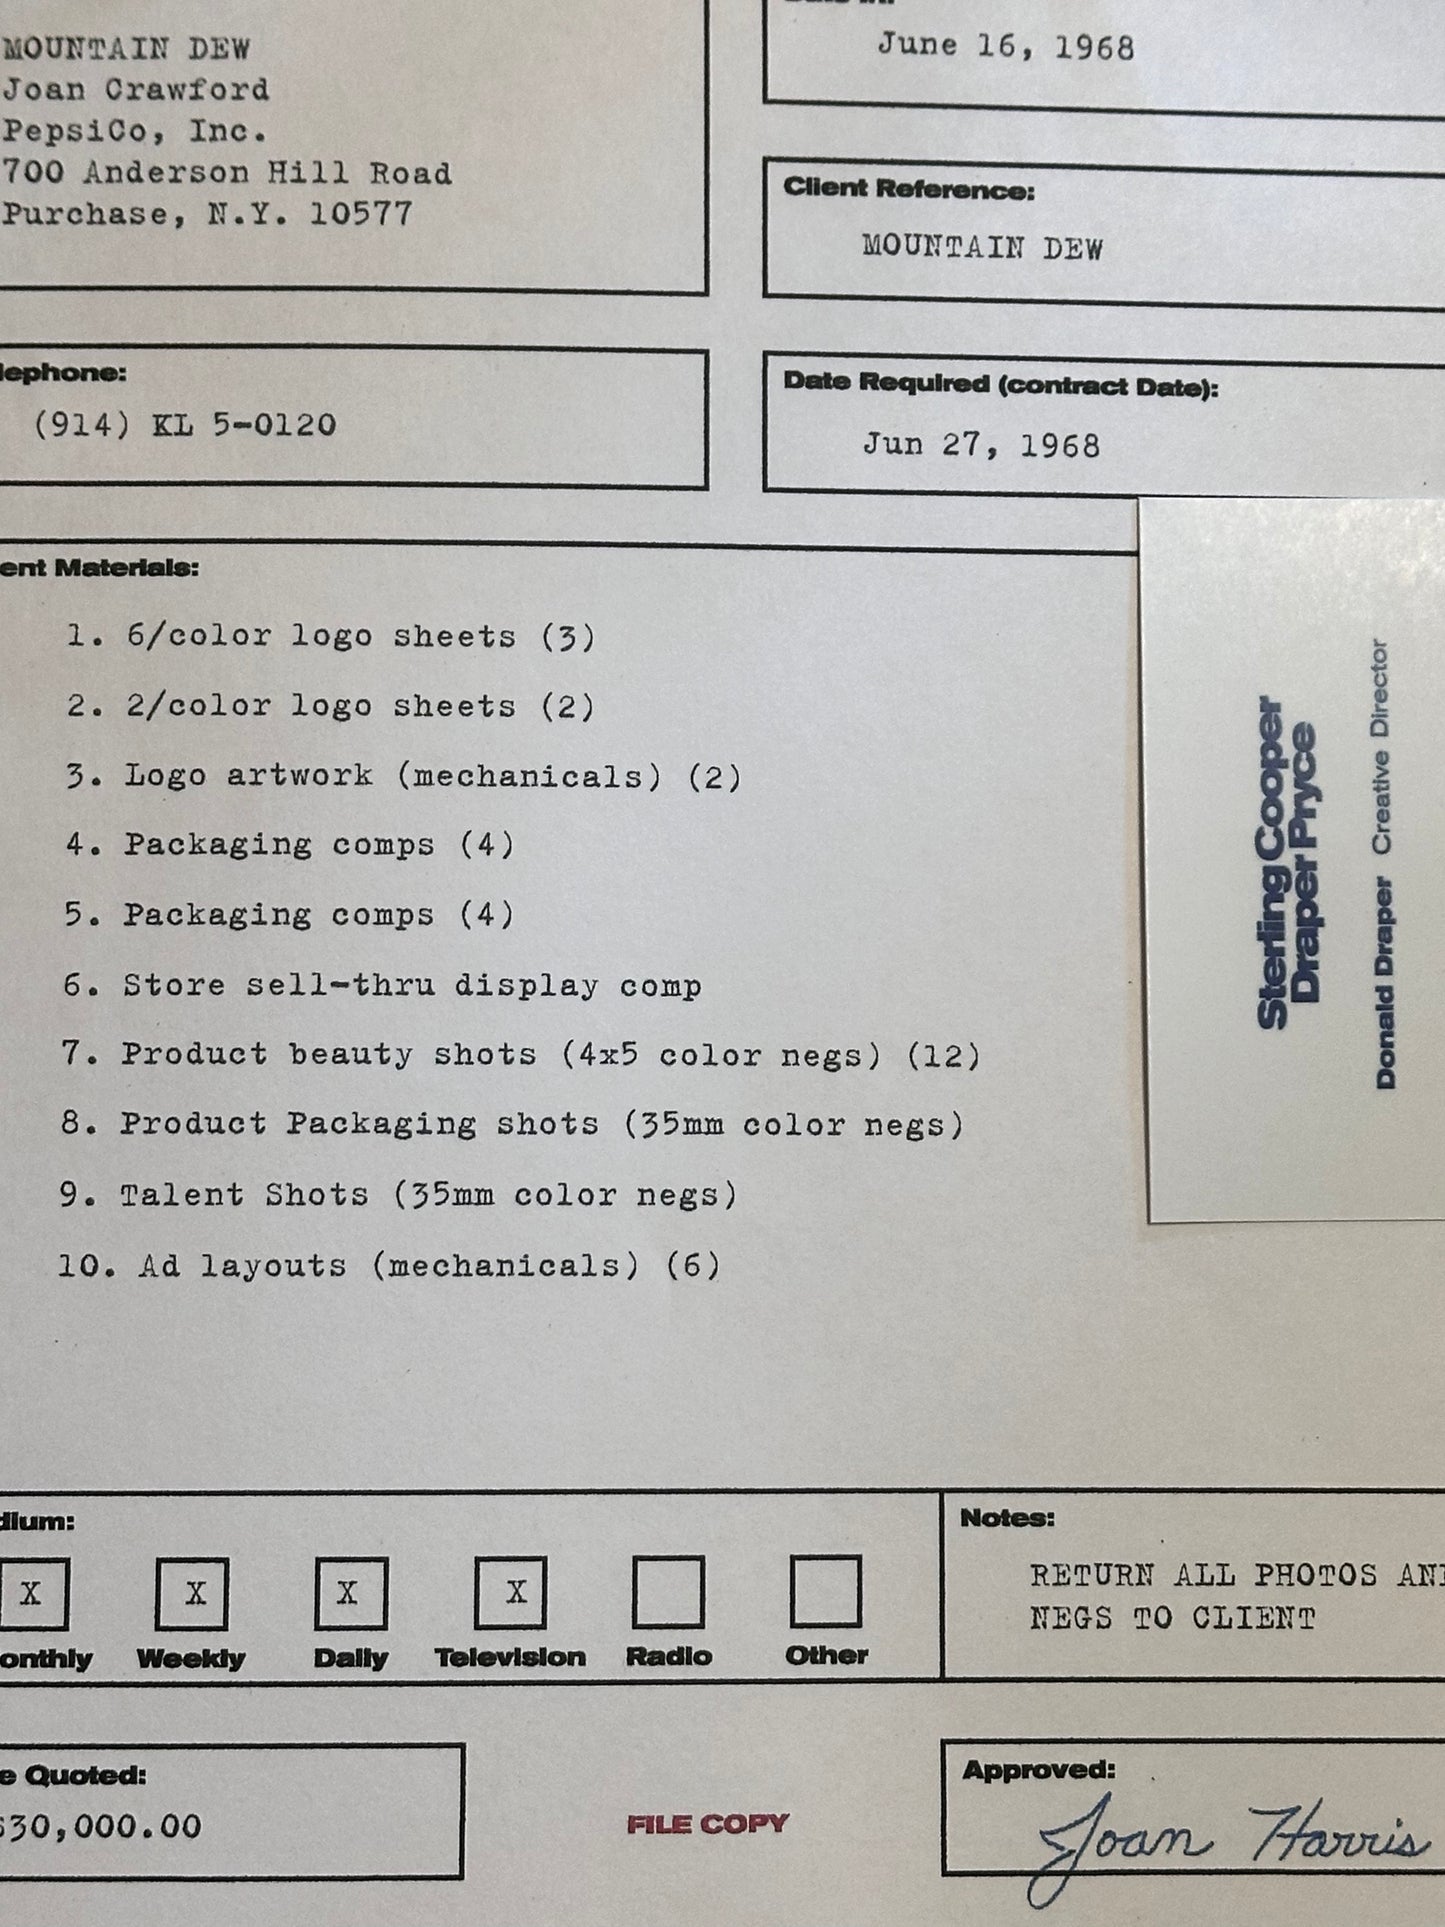 MAD MEN: Joan Harris’ PepsiCo Mountain Dew Job Sheet from June 16, 1968 with Don Business Card